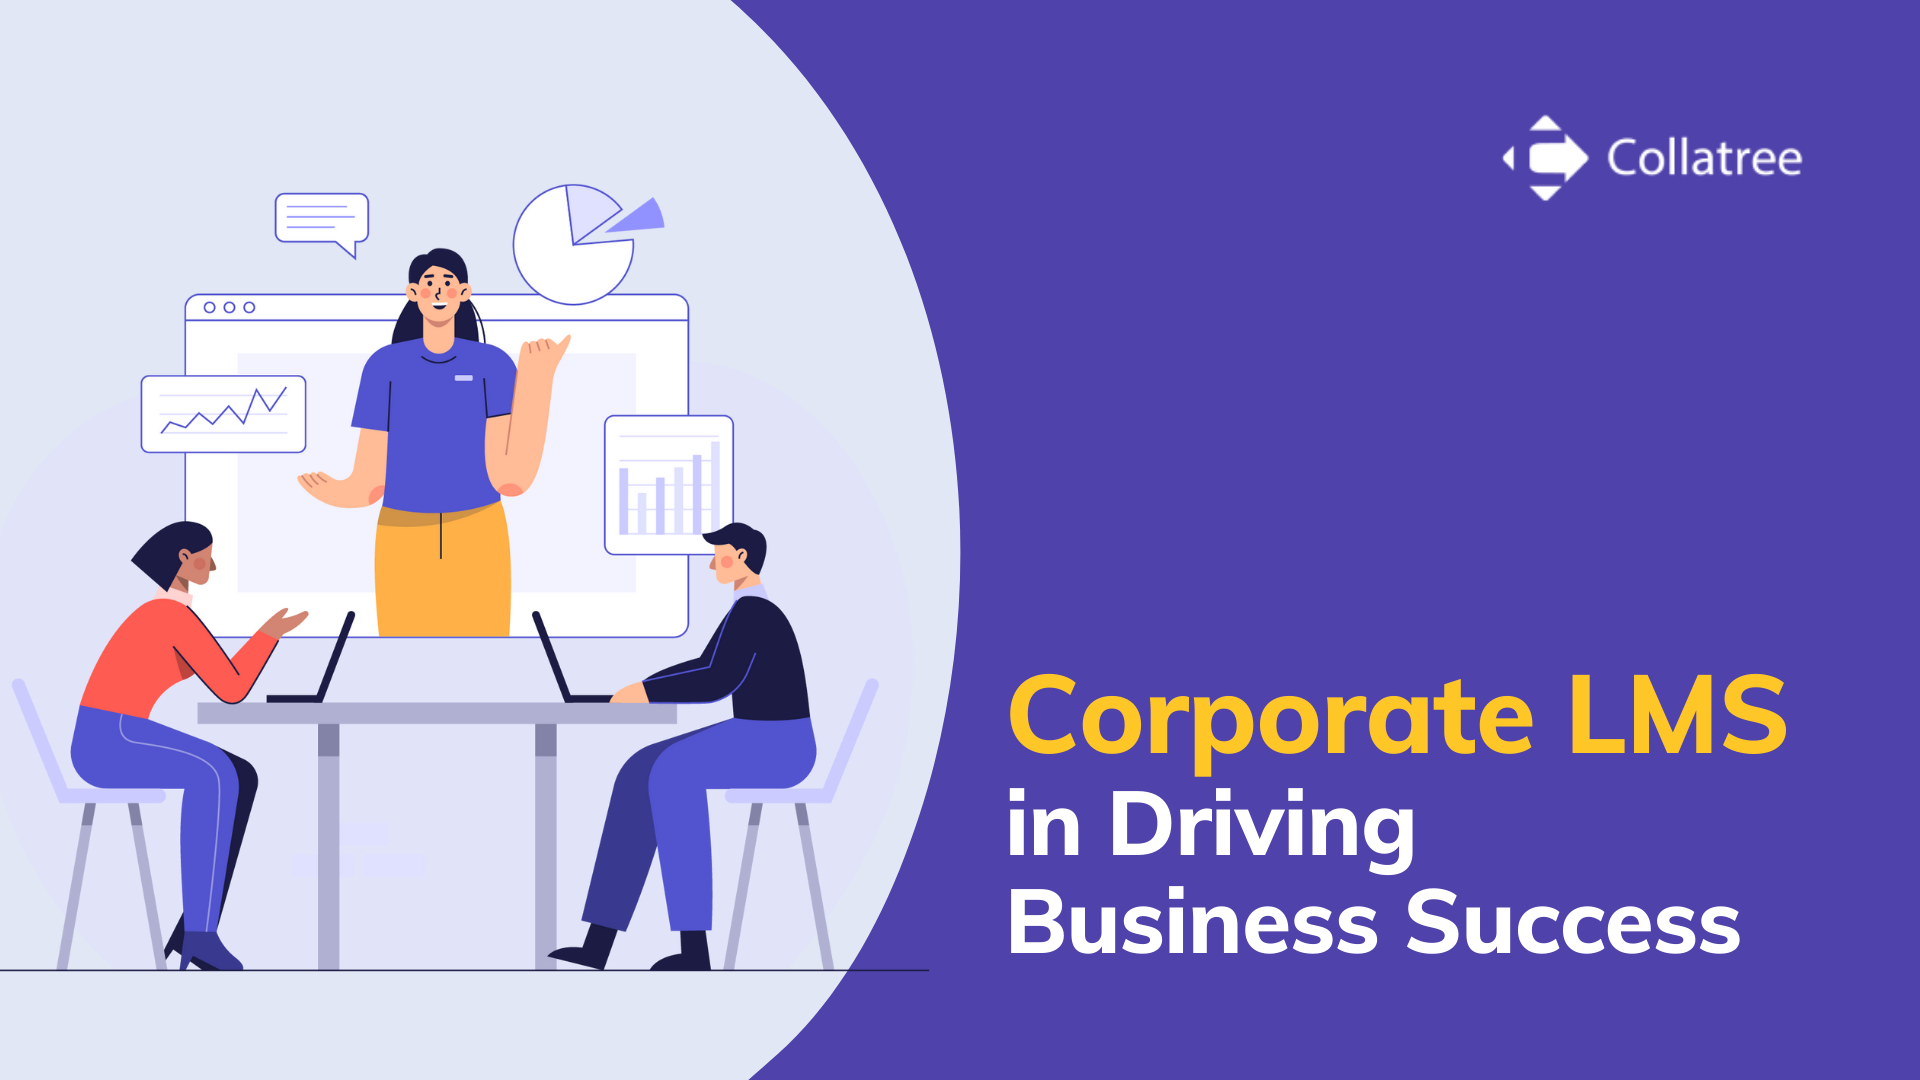 Corporate LMS in Driving Business Success